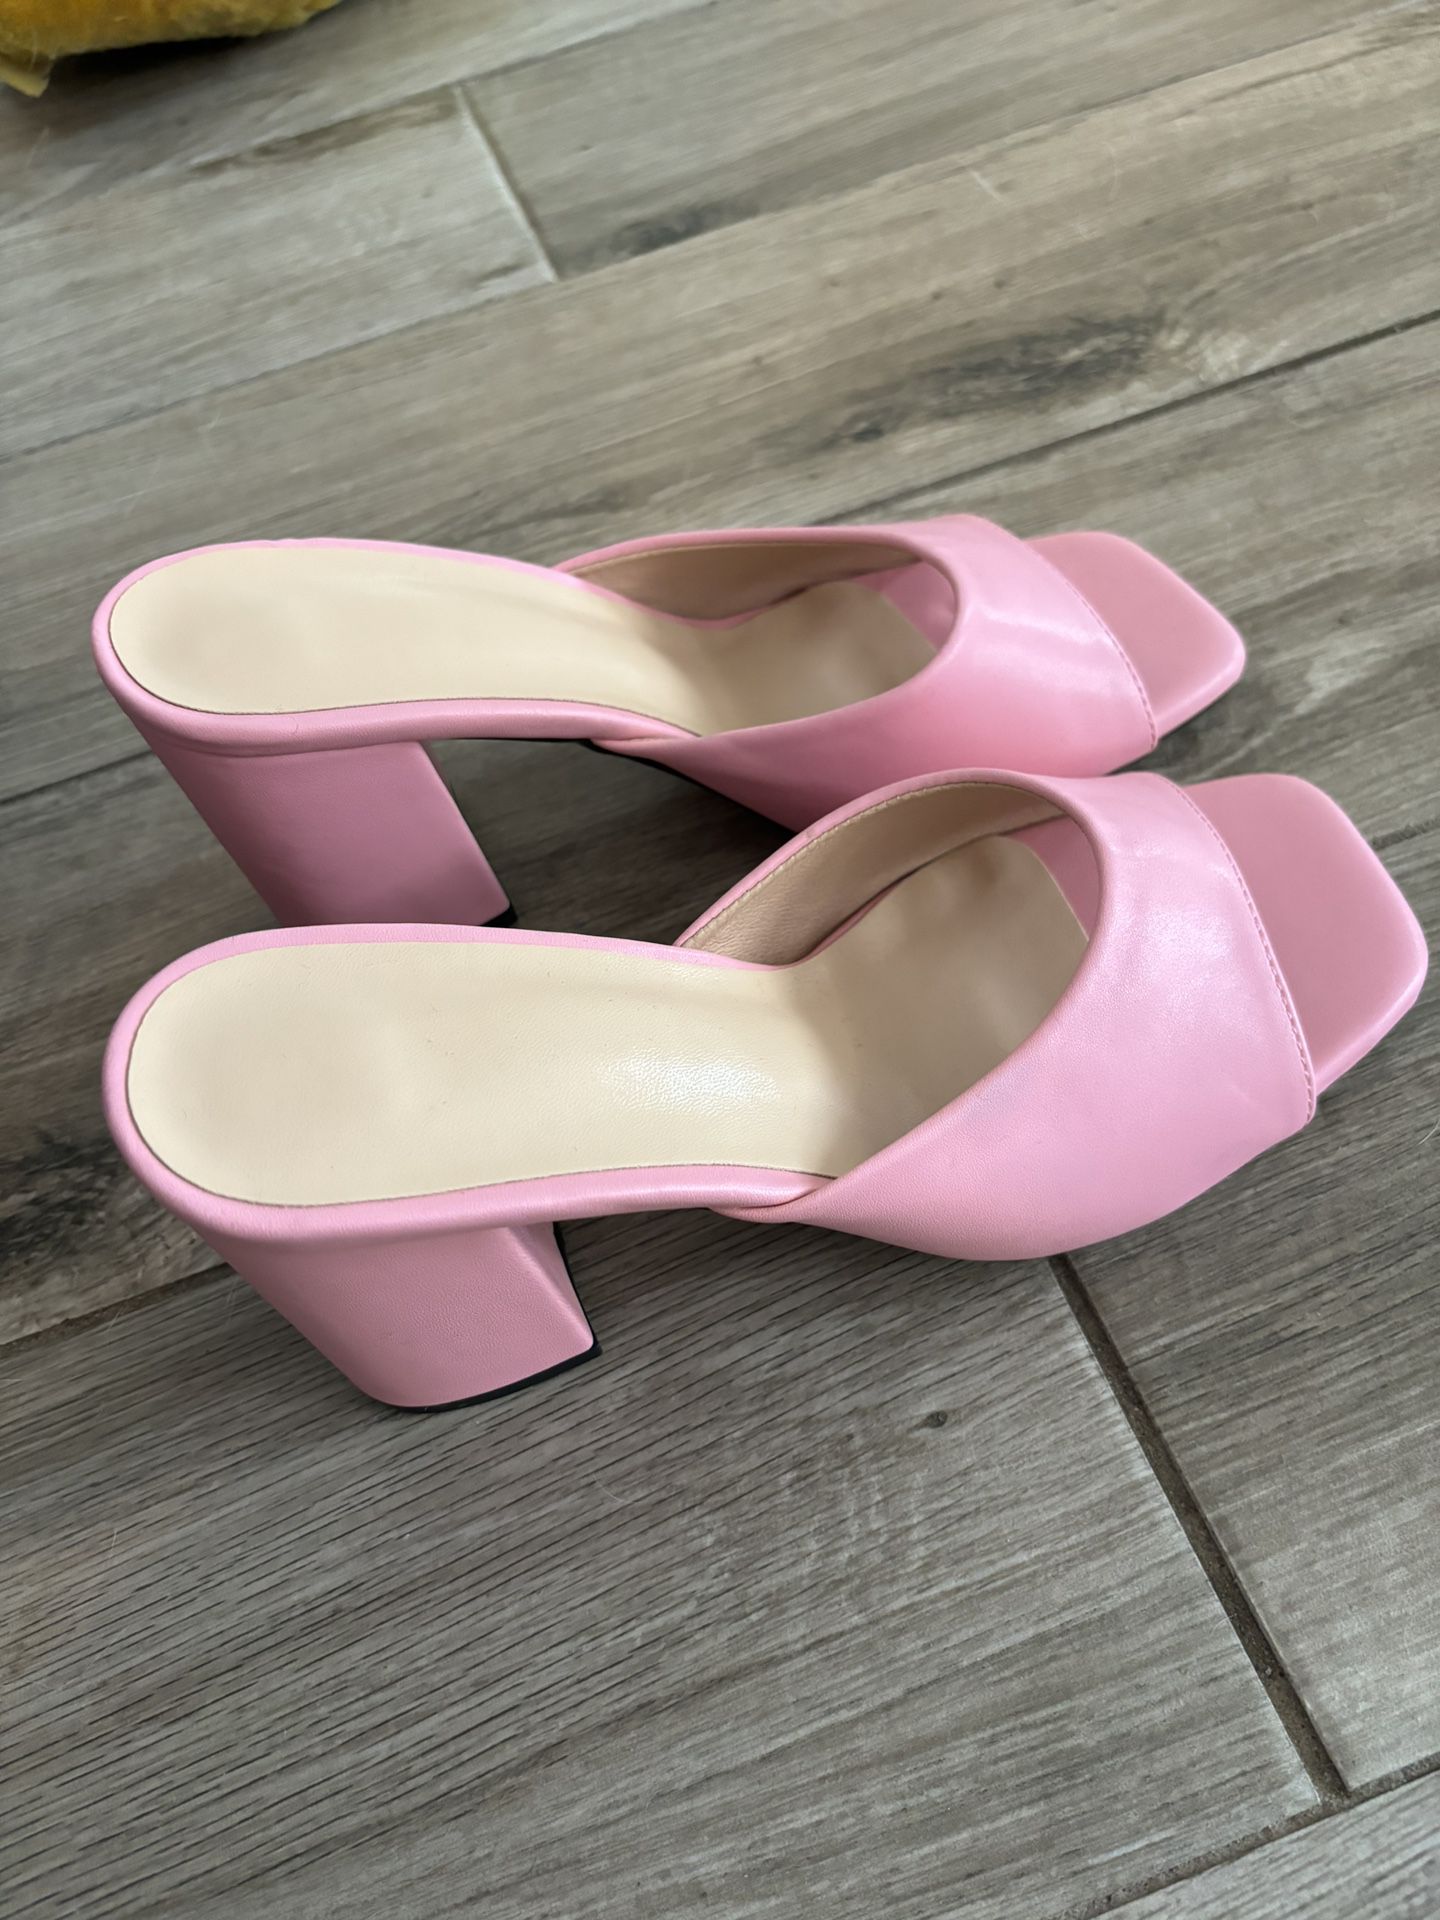 Women Shoes, Heels about 2.5inches, Pink, New Never Worn Outside, Size 37